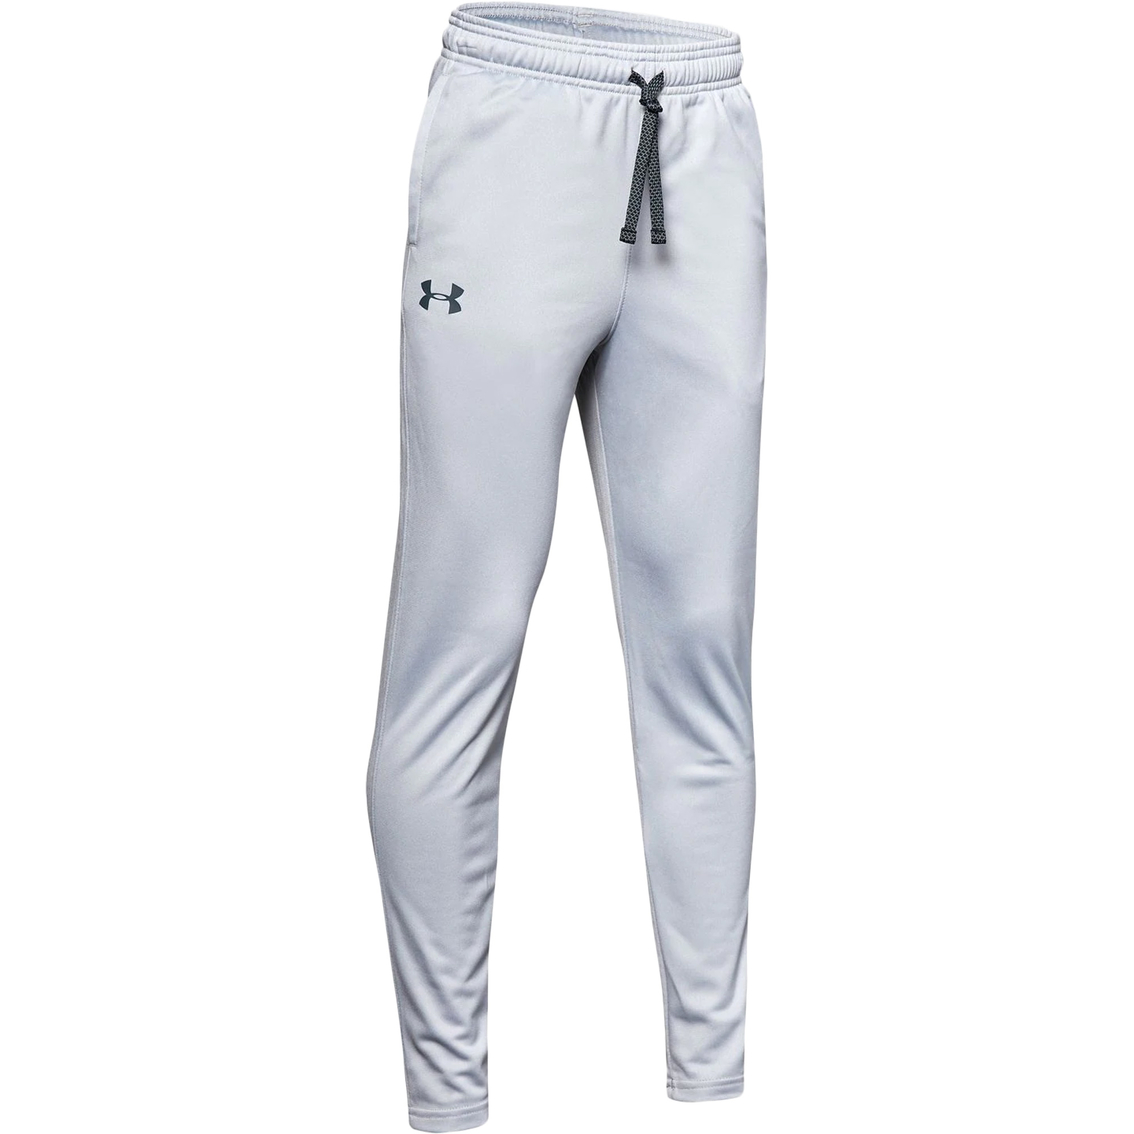 Under Armour Boys Brawler 2.0 Tapered Pants, Boys 8-20, Clothing &  Accessories